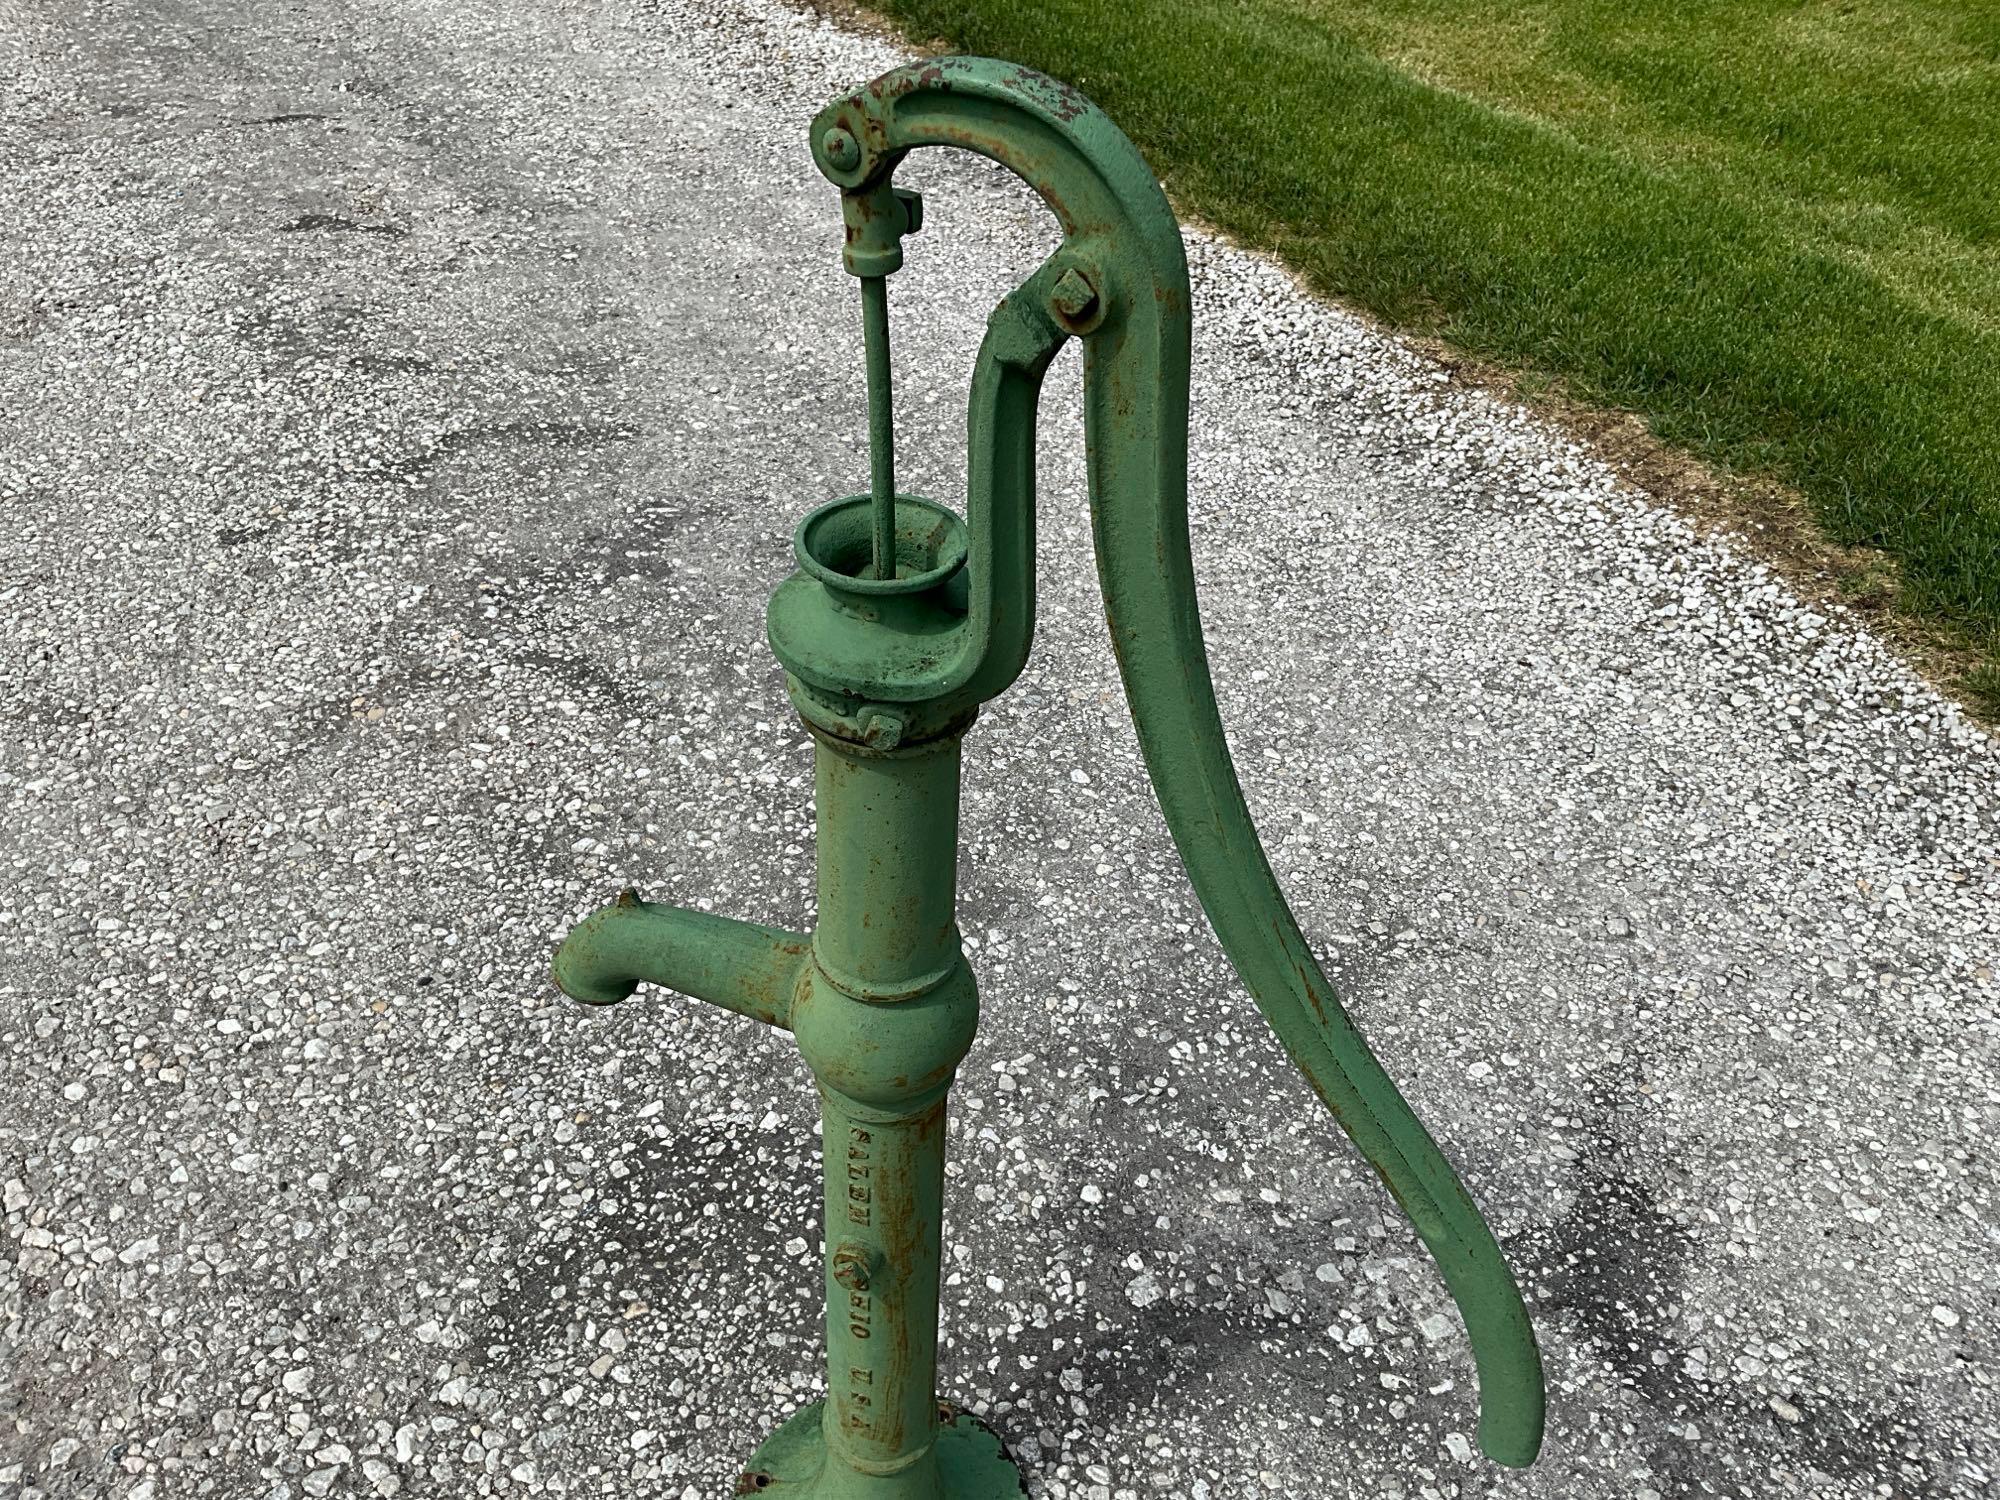 The Deming Co. well pump